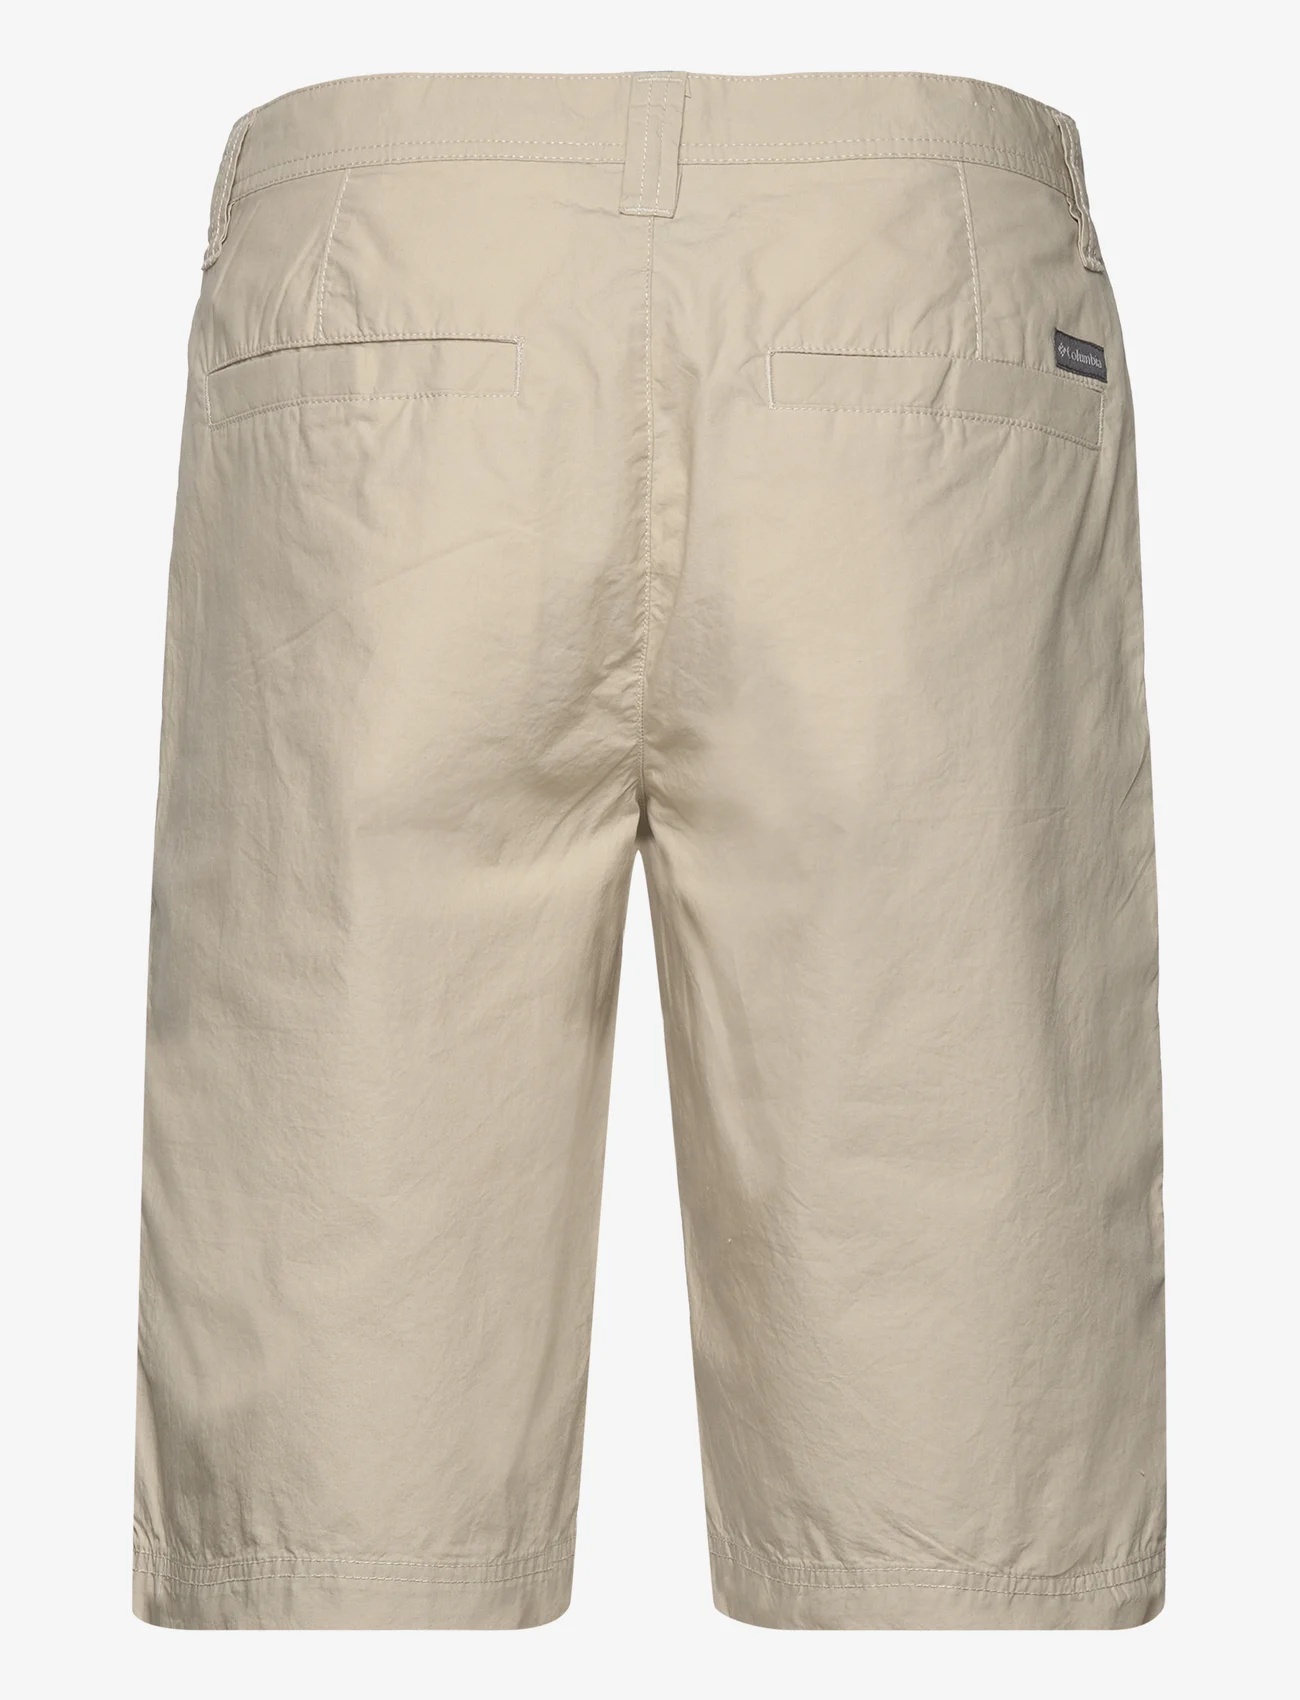 Columbia Sportswear - Washed Out Short - alhaisimmat hinnat - fossil - 1